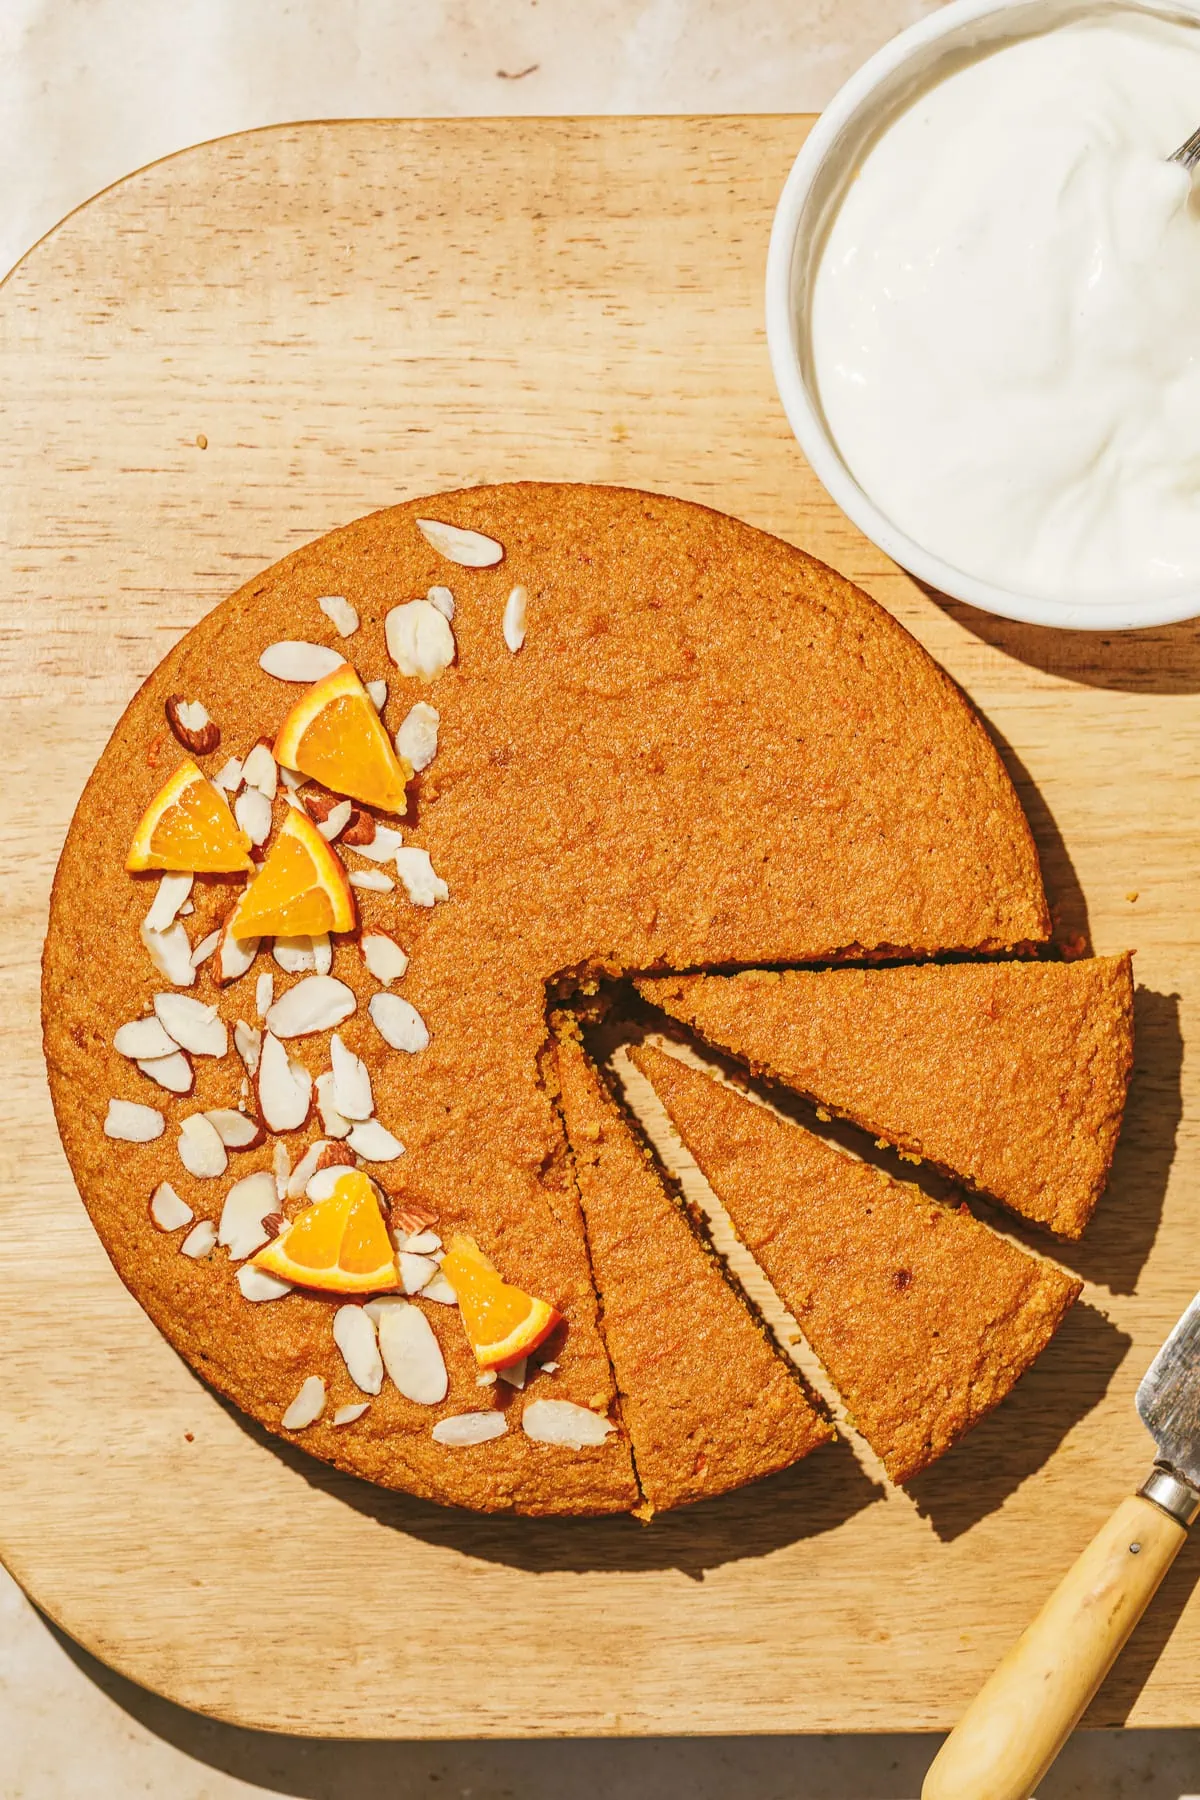 Overhead image of gluten-free orange cake with almond slices on top.